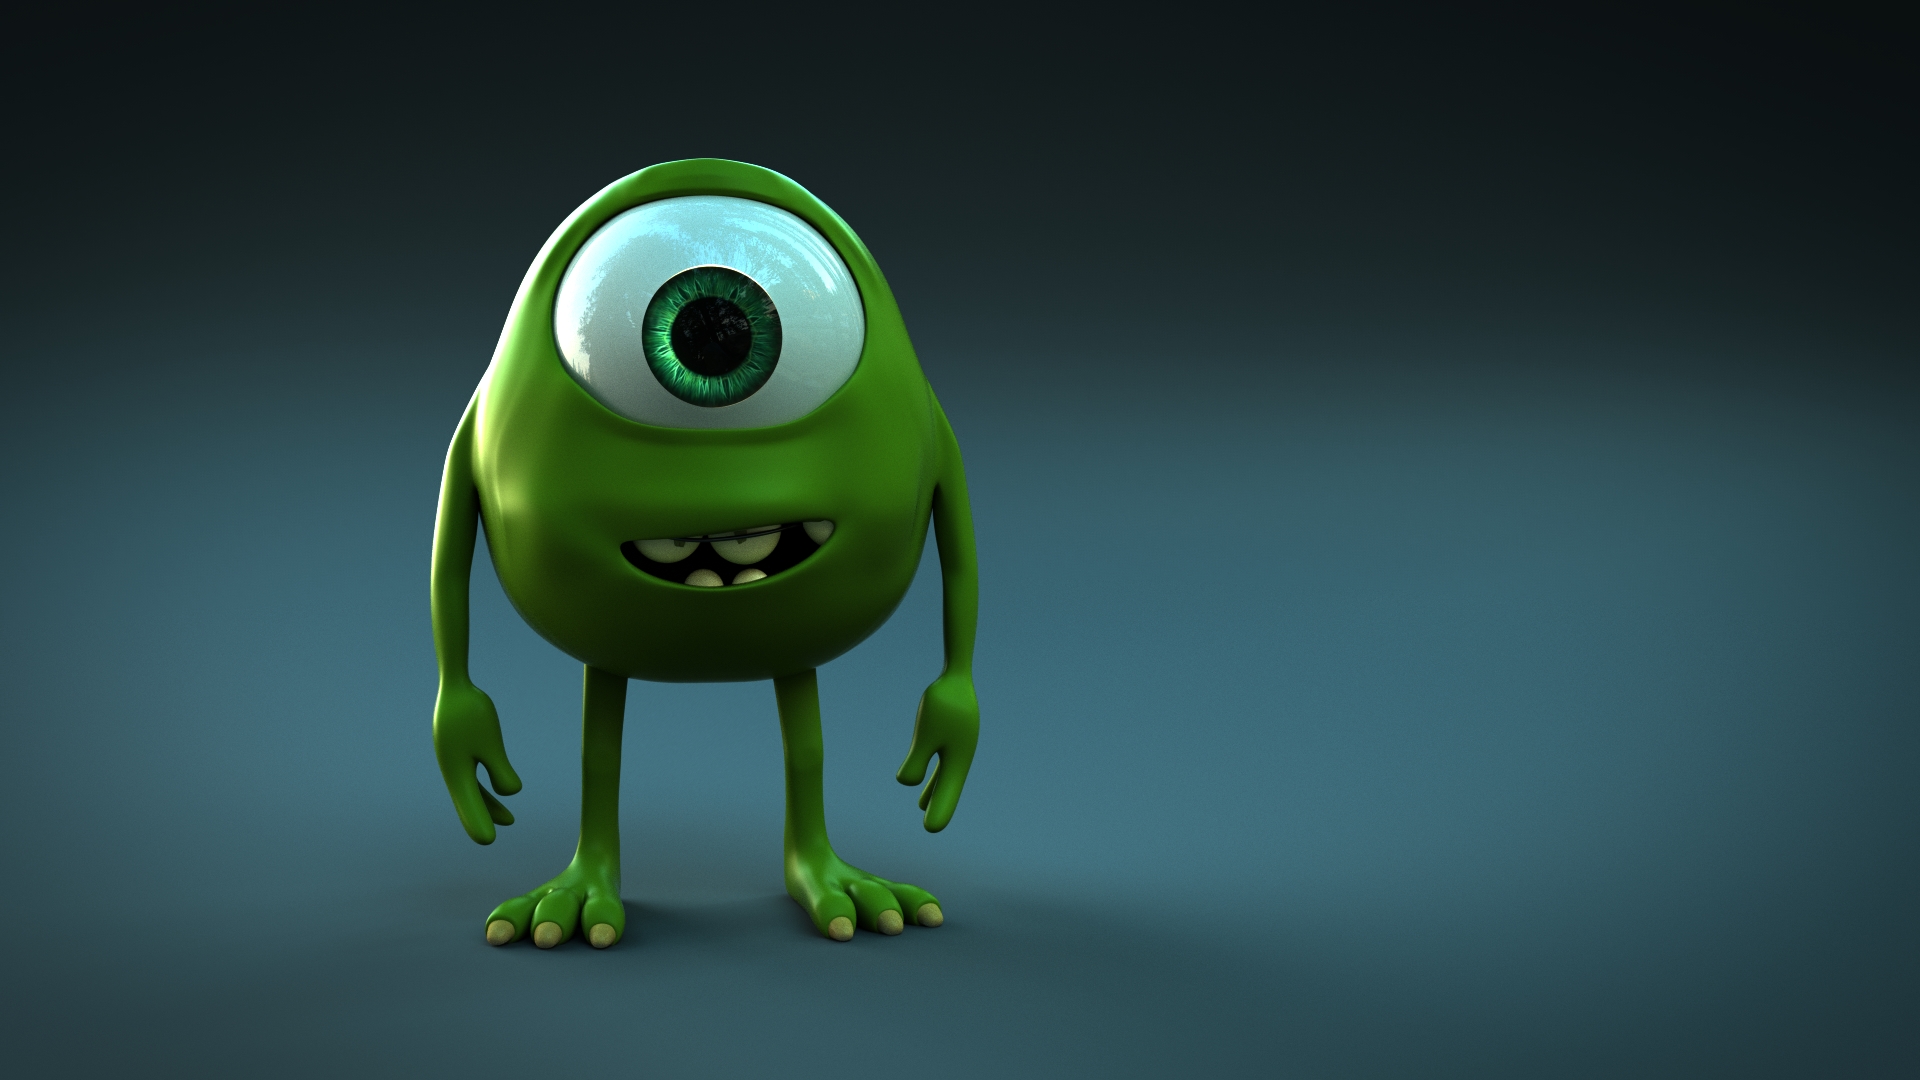 Mike Wazowski's Cousin - Finished Projects - Blender Artists Community